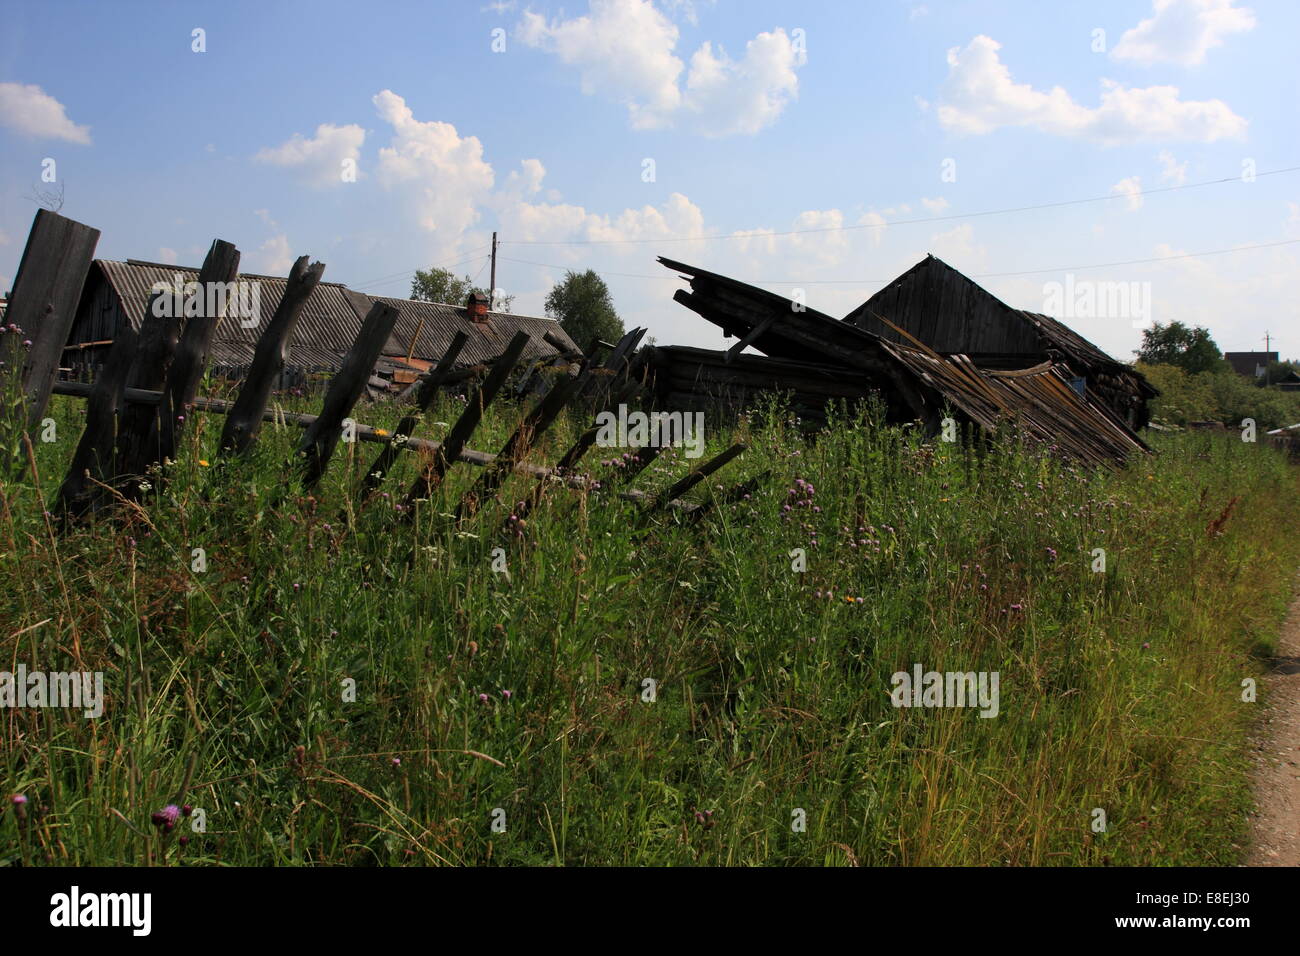 A log house falling apart in village of Serbishino in Ural Mountains, near Ekaterinburg, the third largest city in Russia. Stock Photo